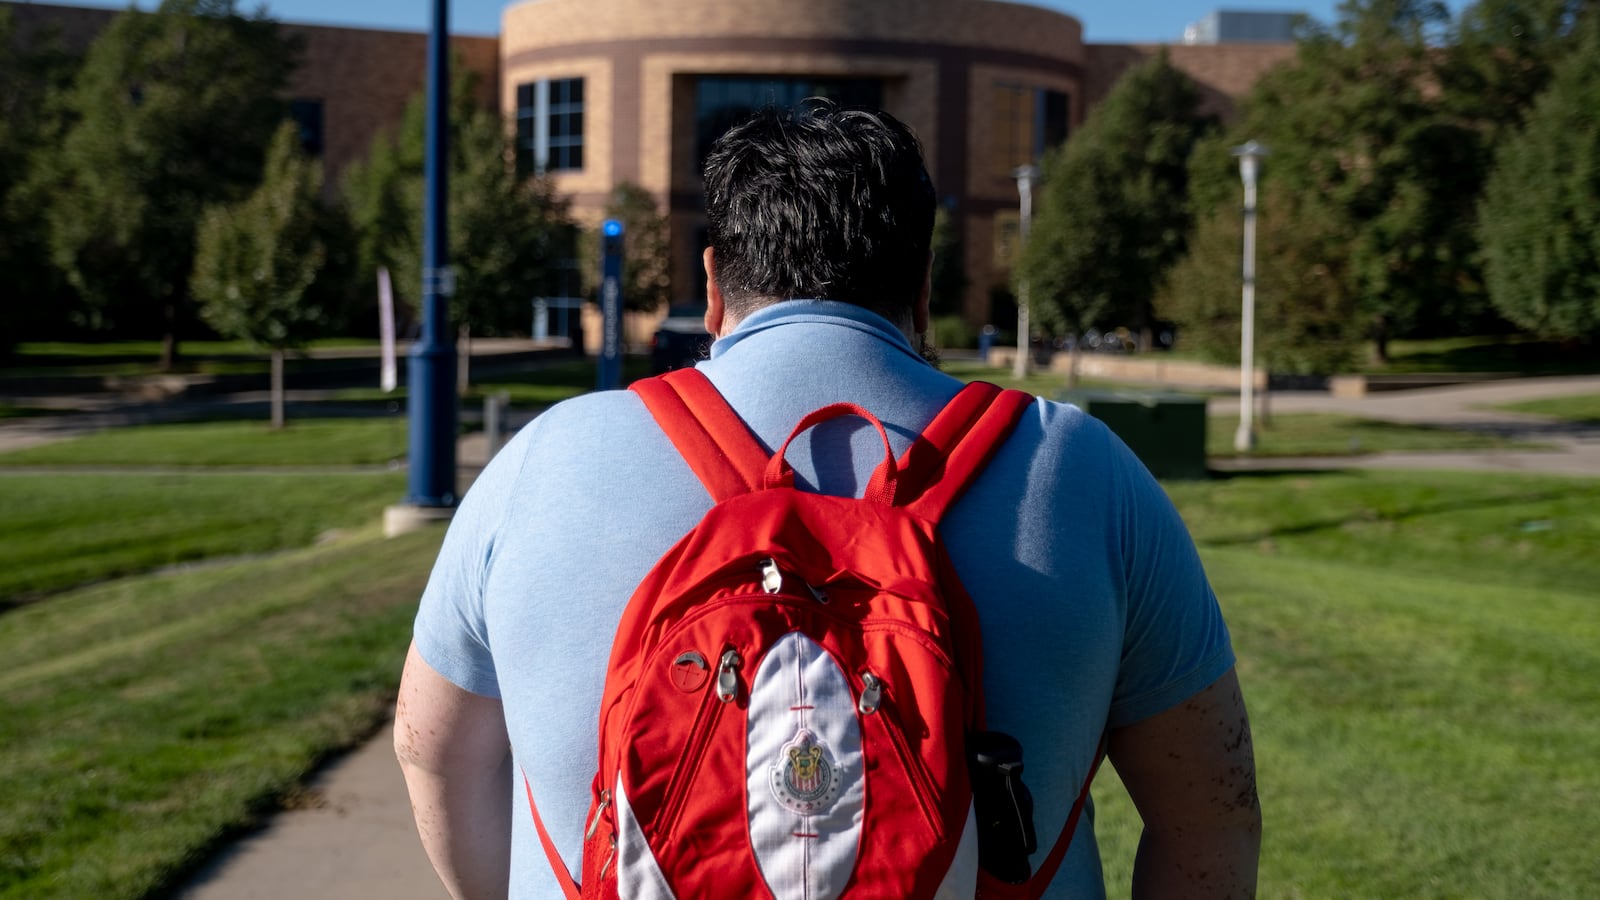 A student wearing a blue shirt and red backpack walks down a sidewalk on a college campus.